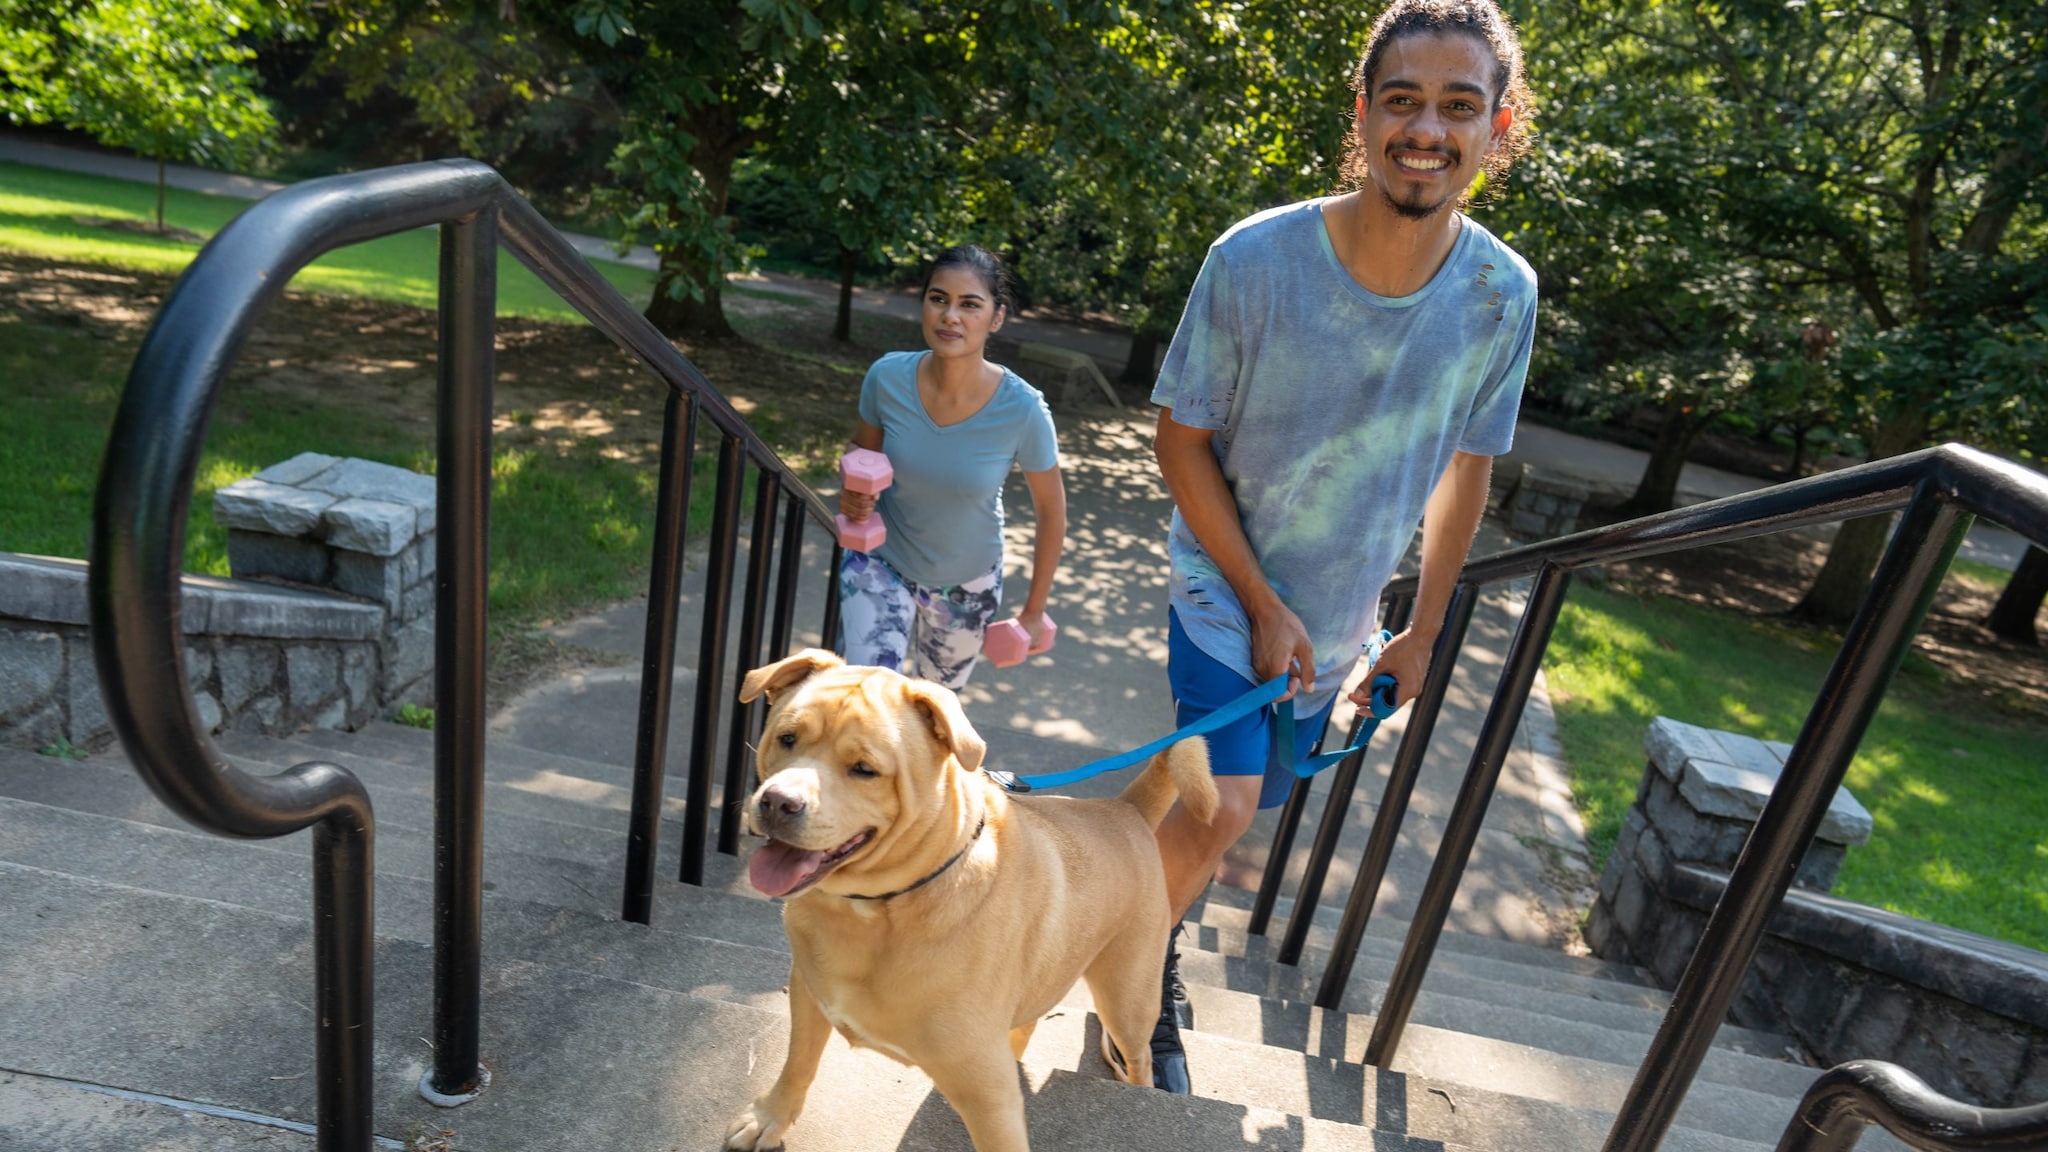 Two adults walking up stairs with a dog on a leash.